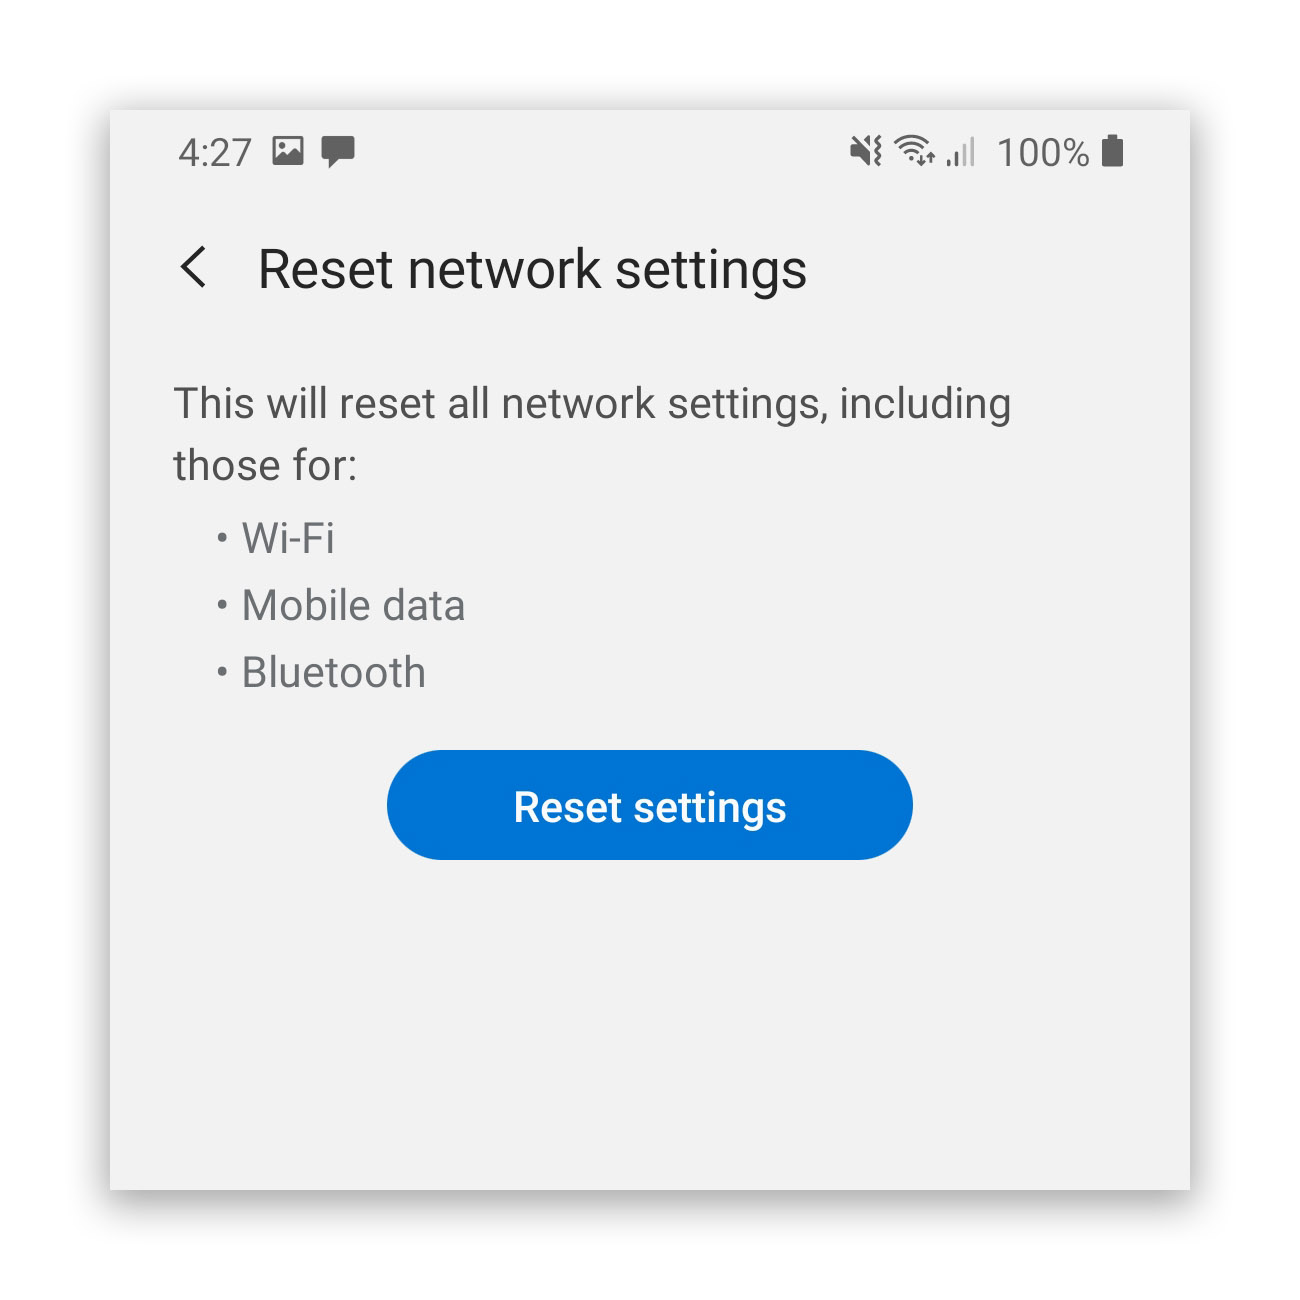 galaxy a50 keeps dropping wi-fi connection